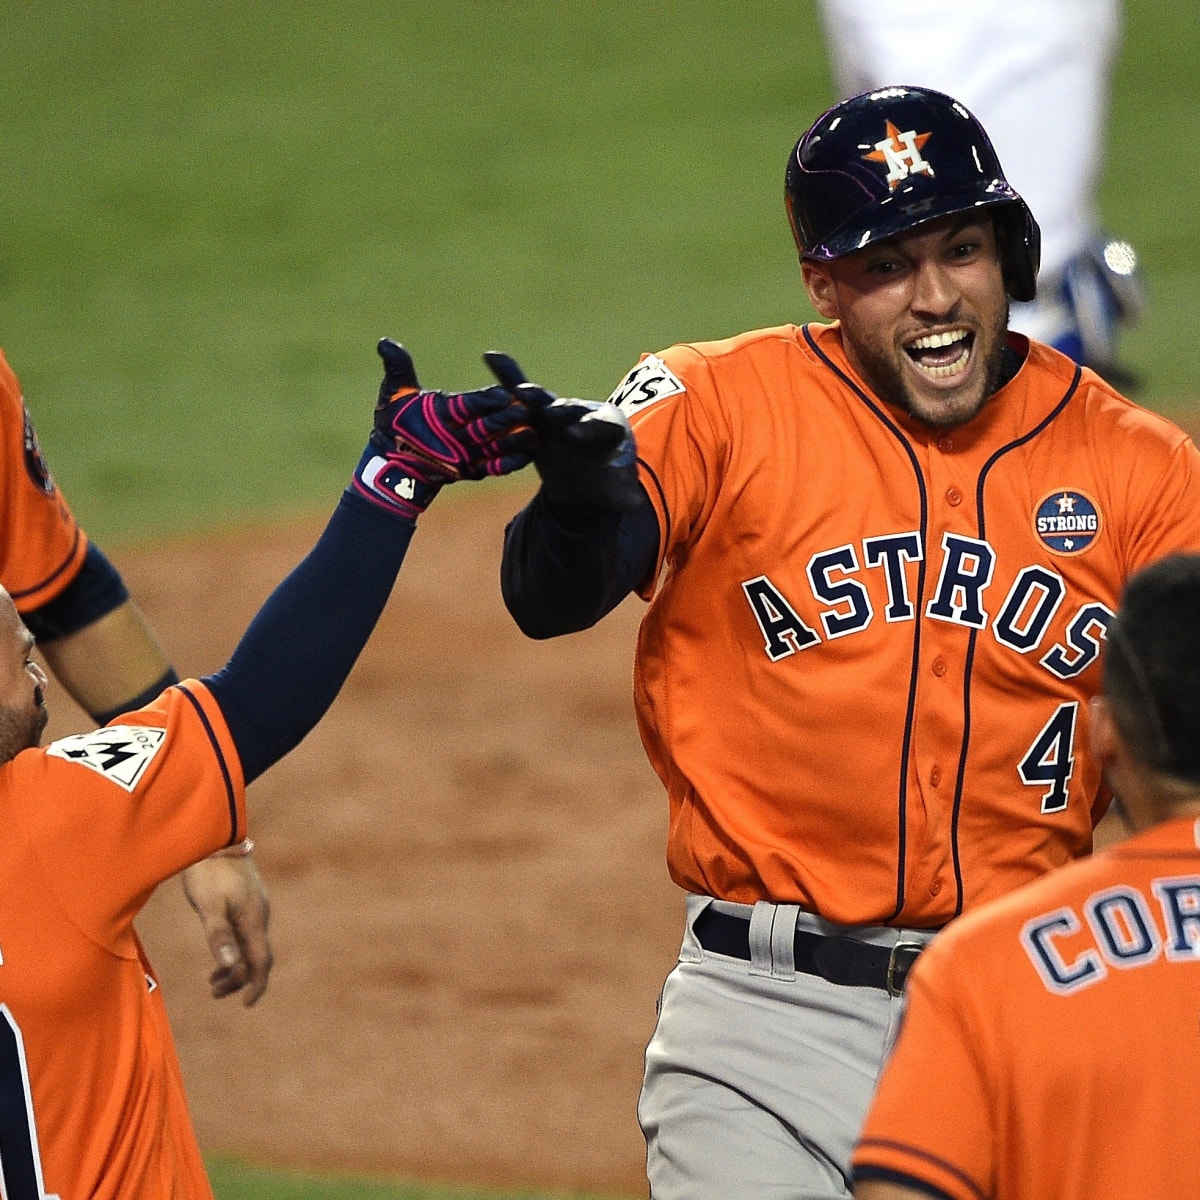 Carlos Correa has polished his hitting approach in his walk year